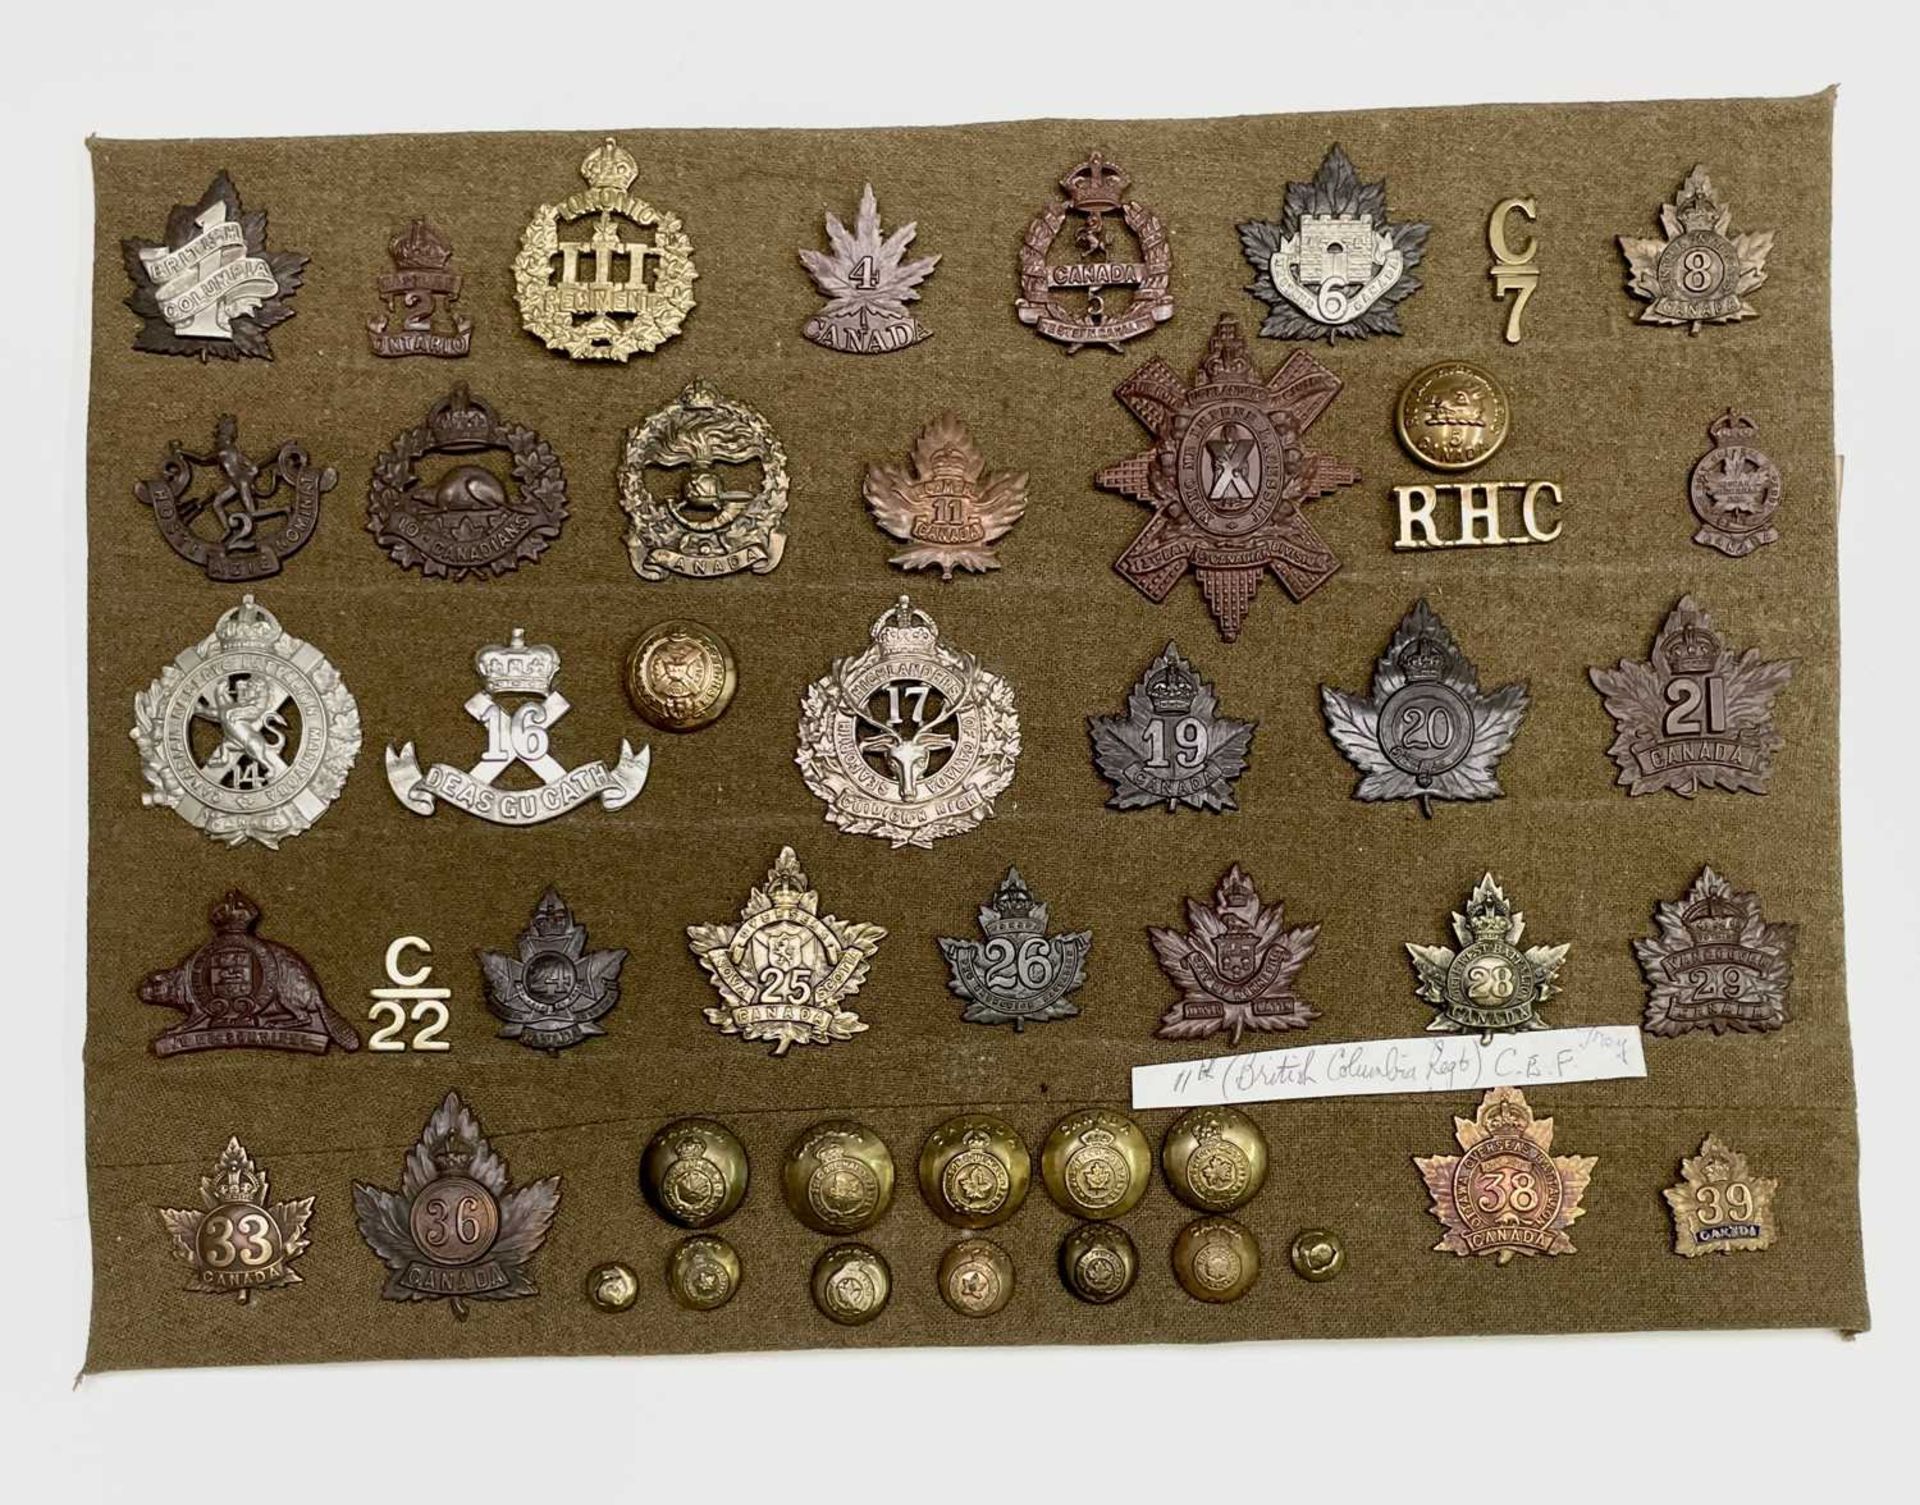 Canadian Expeditionary Forces 1 to 39 Battalions. A display card containing cap badges, collar dogs,